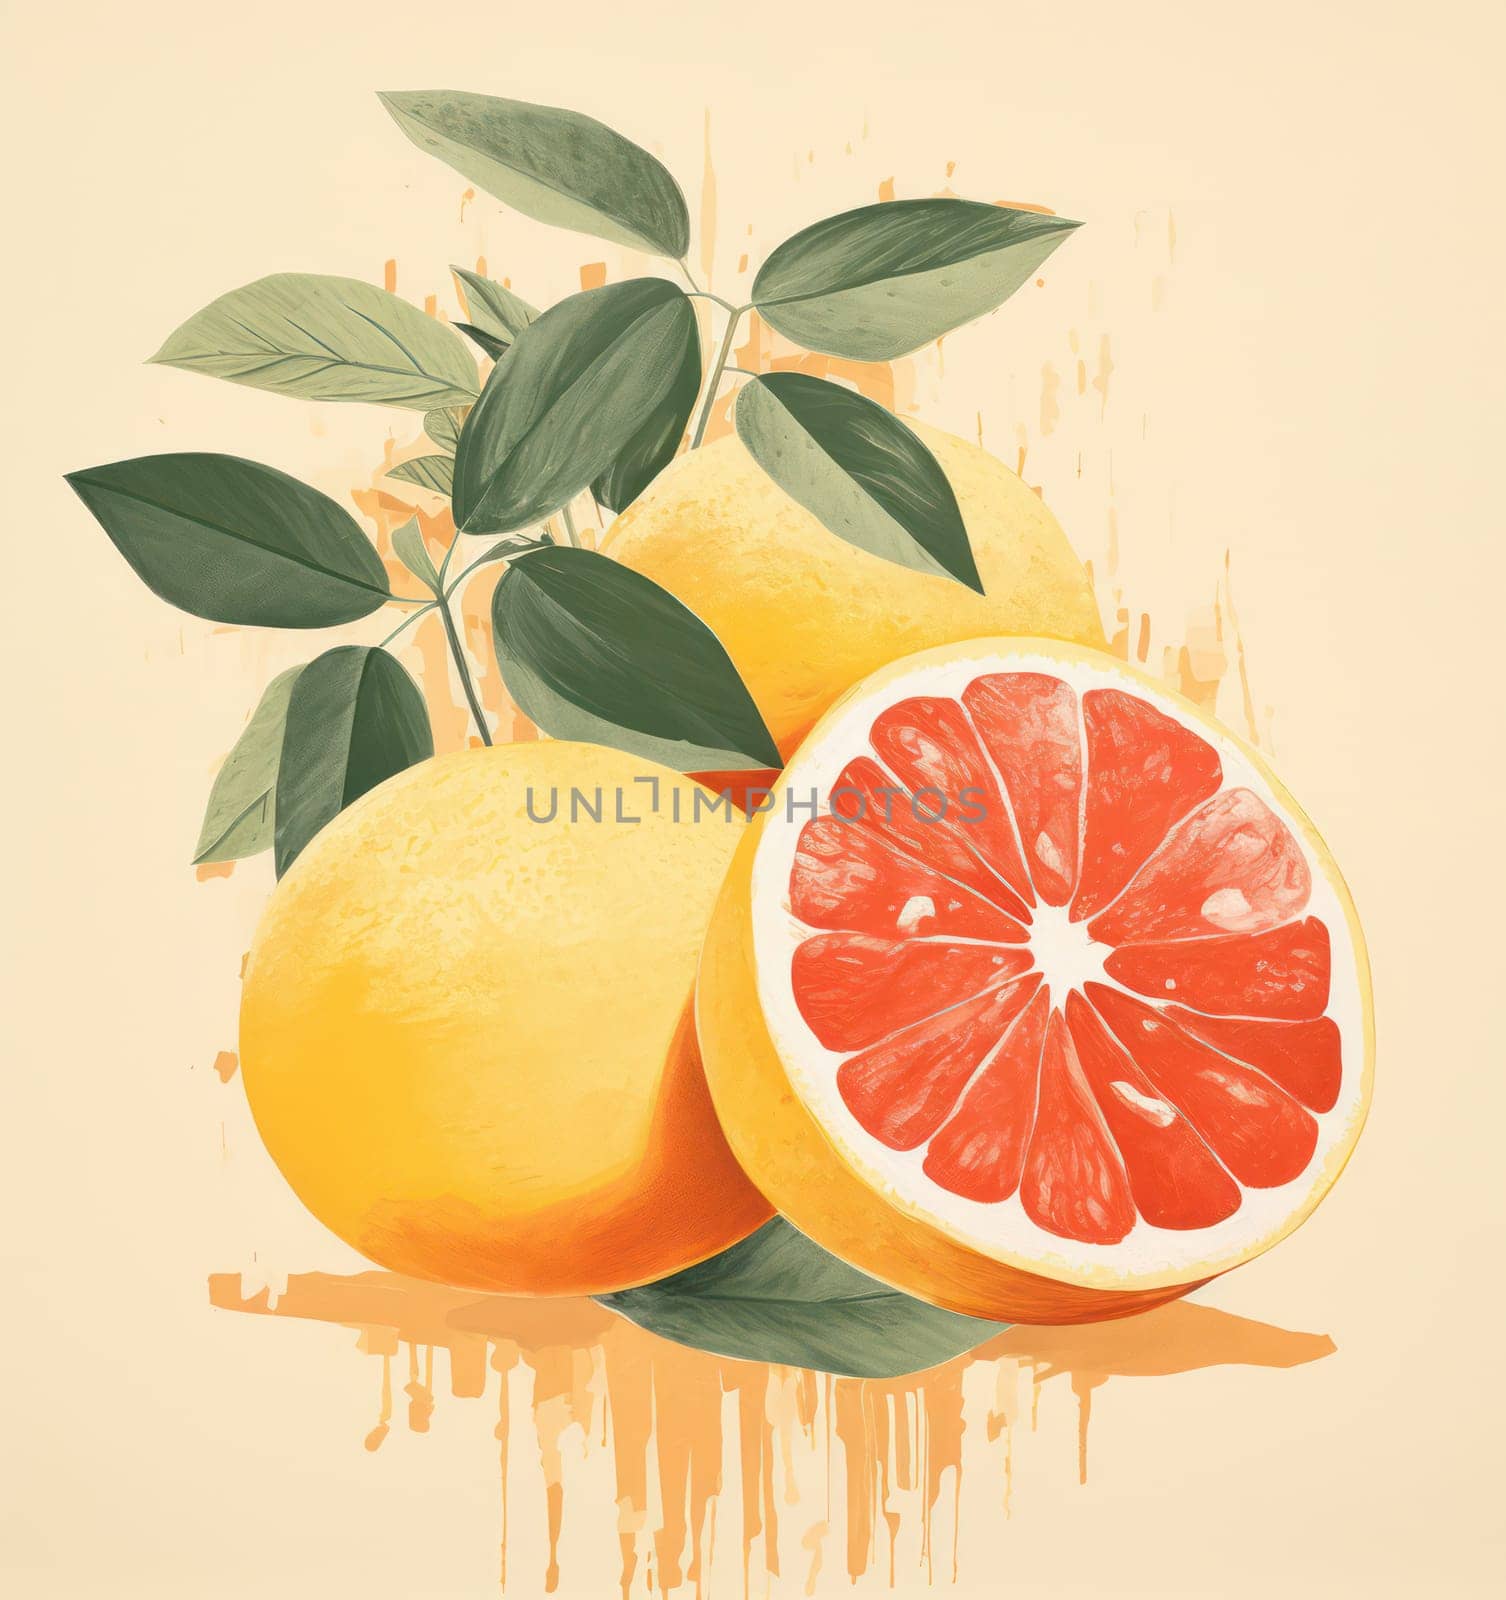 Fresh Juicy Citrus Slices: A Vibrant Slice of Sweetness on a Green Leaf with a Splash of Health and Vitamin C by Vichizh